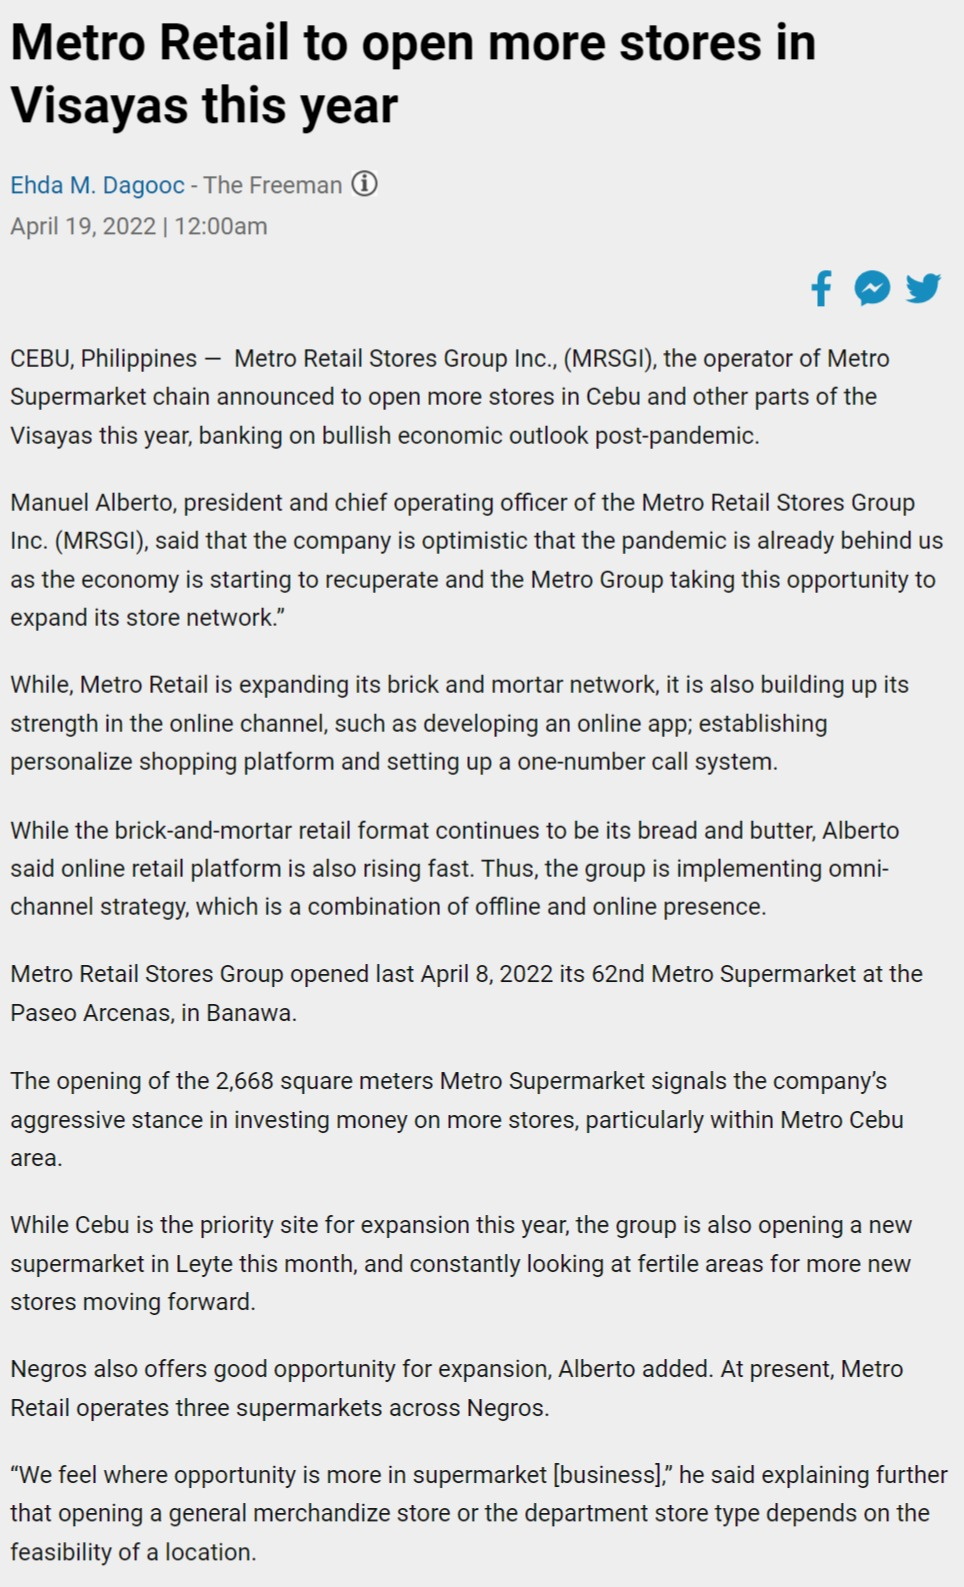 Metro Retail to open more stores in Visayas this year. The Freeman